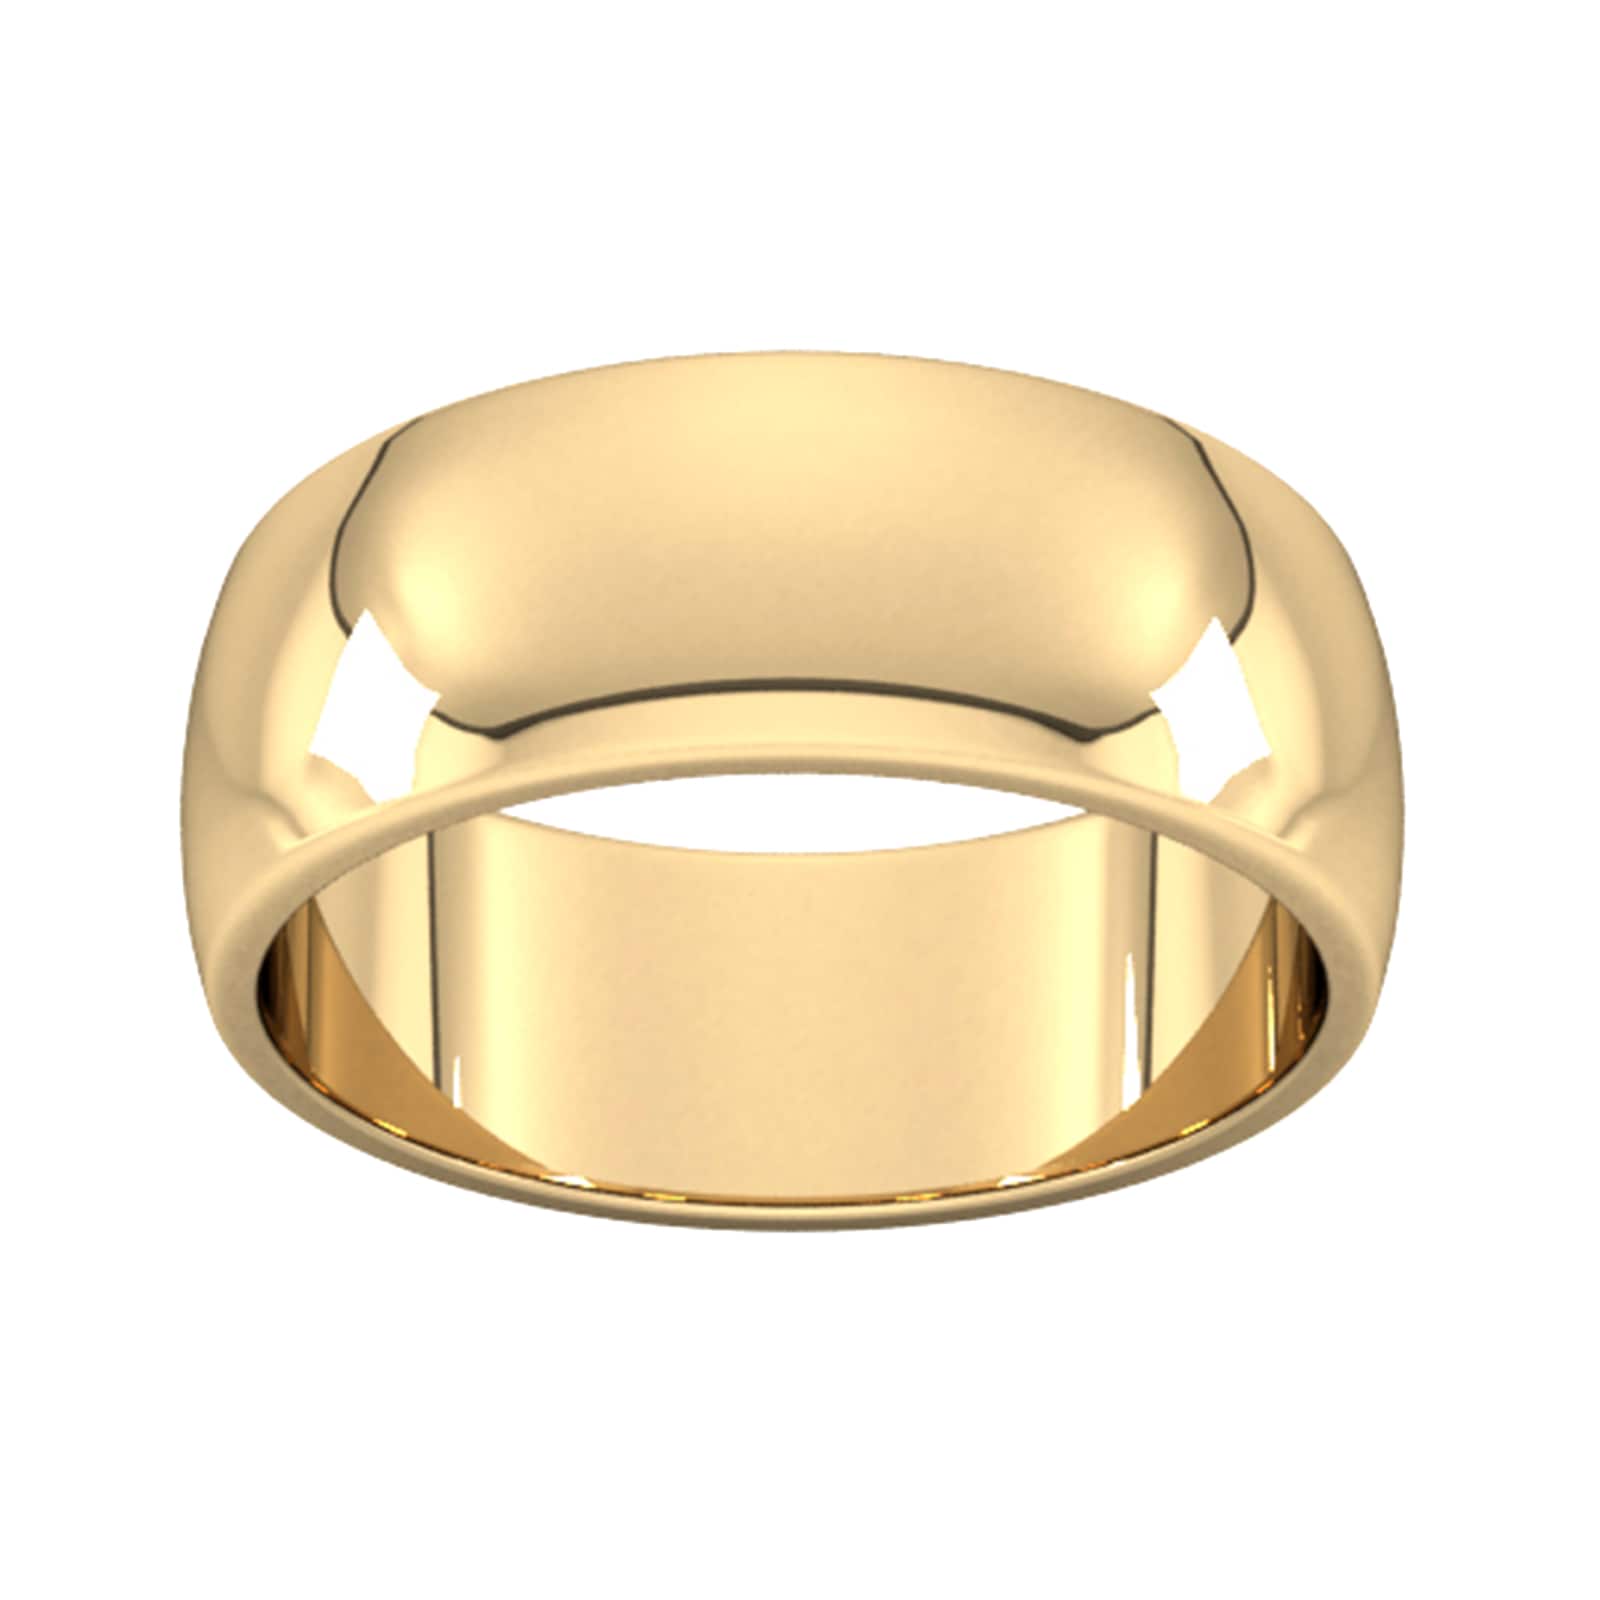 8mm D Shape Heavy Wedding Ring In 18 Carat Yellow Gold - Ring Size U